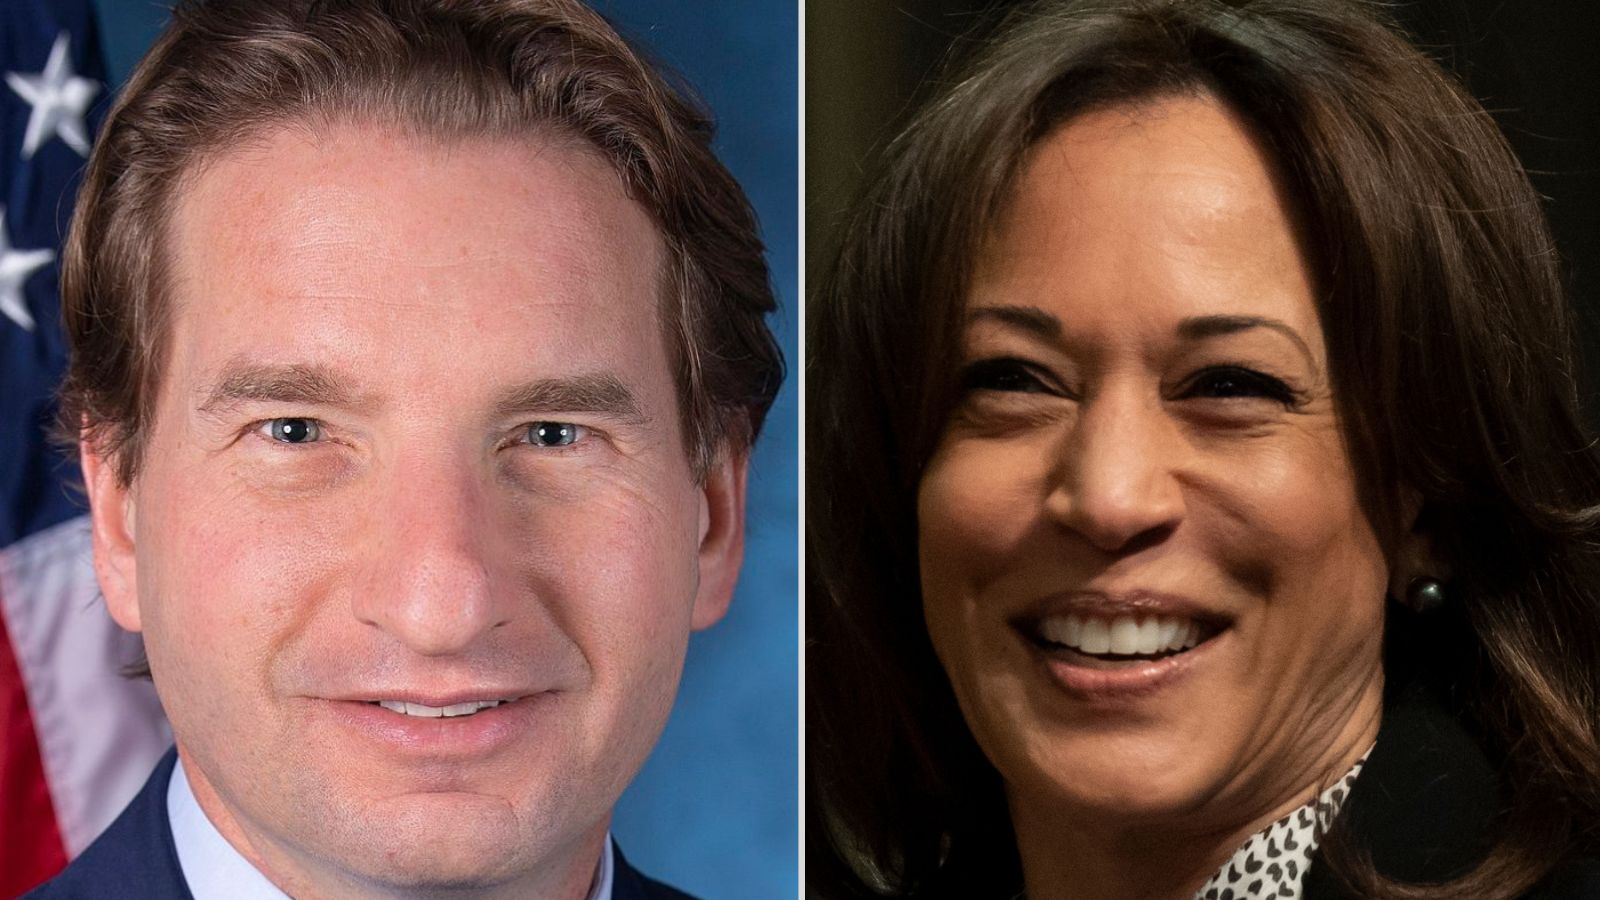 “She’s Not Somebody That People Have Faith In”: Democrat Dean Phillips Faces Backlash Over Remarks About VP Kamala Harris